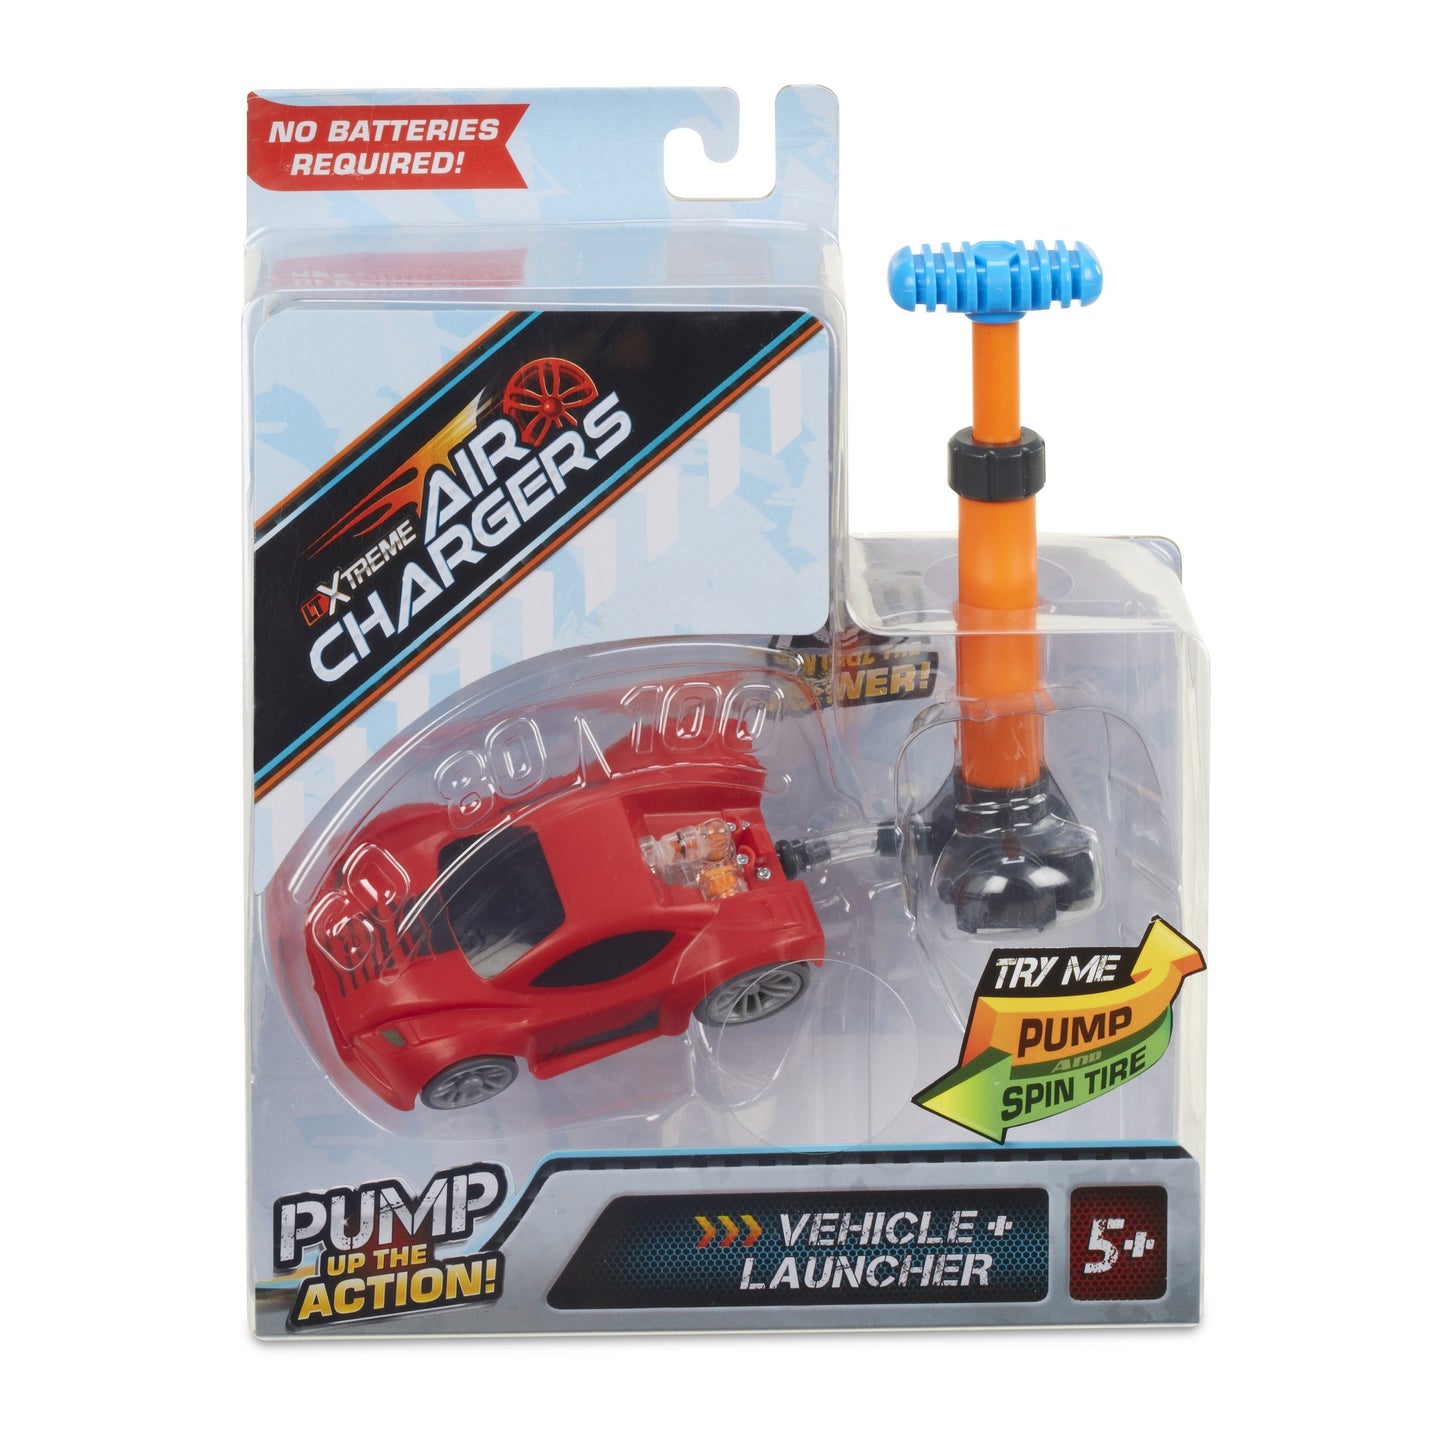 Air Chargers Vehicle and Launcher- Phoenix